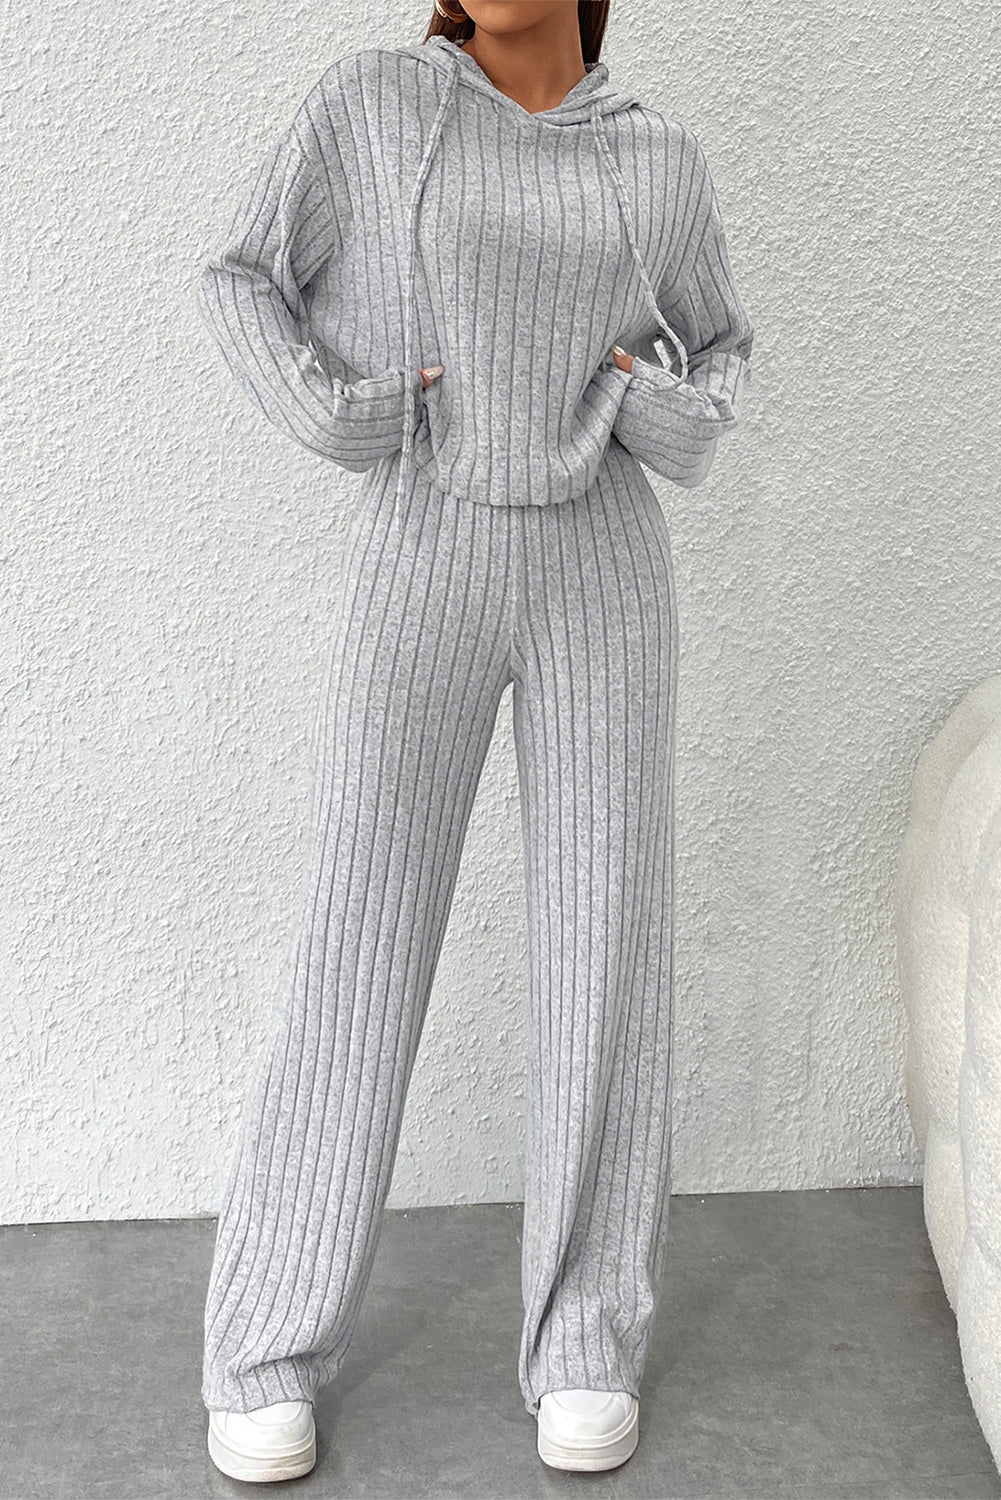 Gray pants set 85%Polyester+10%Viscose+5%Elastane - Ribbed Knit V Neck Slouchy Two-piece Outfit - pants or short set various colors - women's pants set at TFC&H Co.